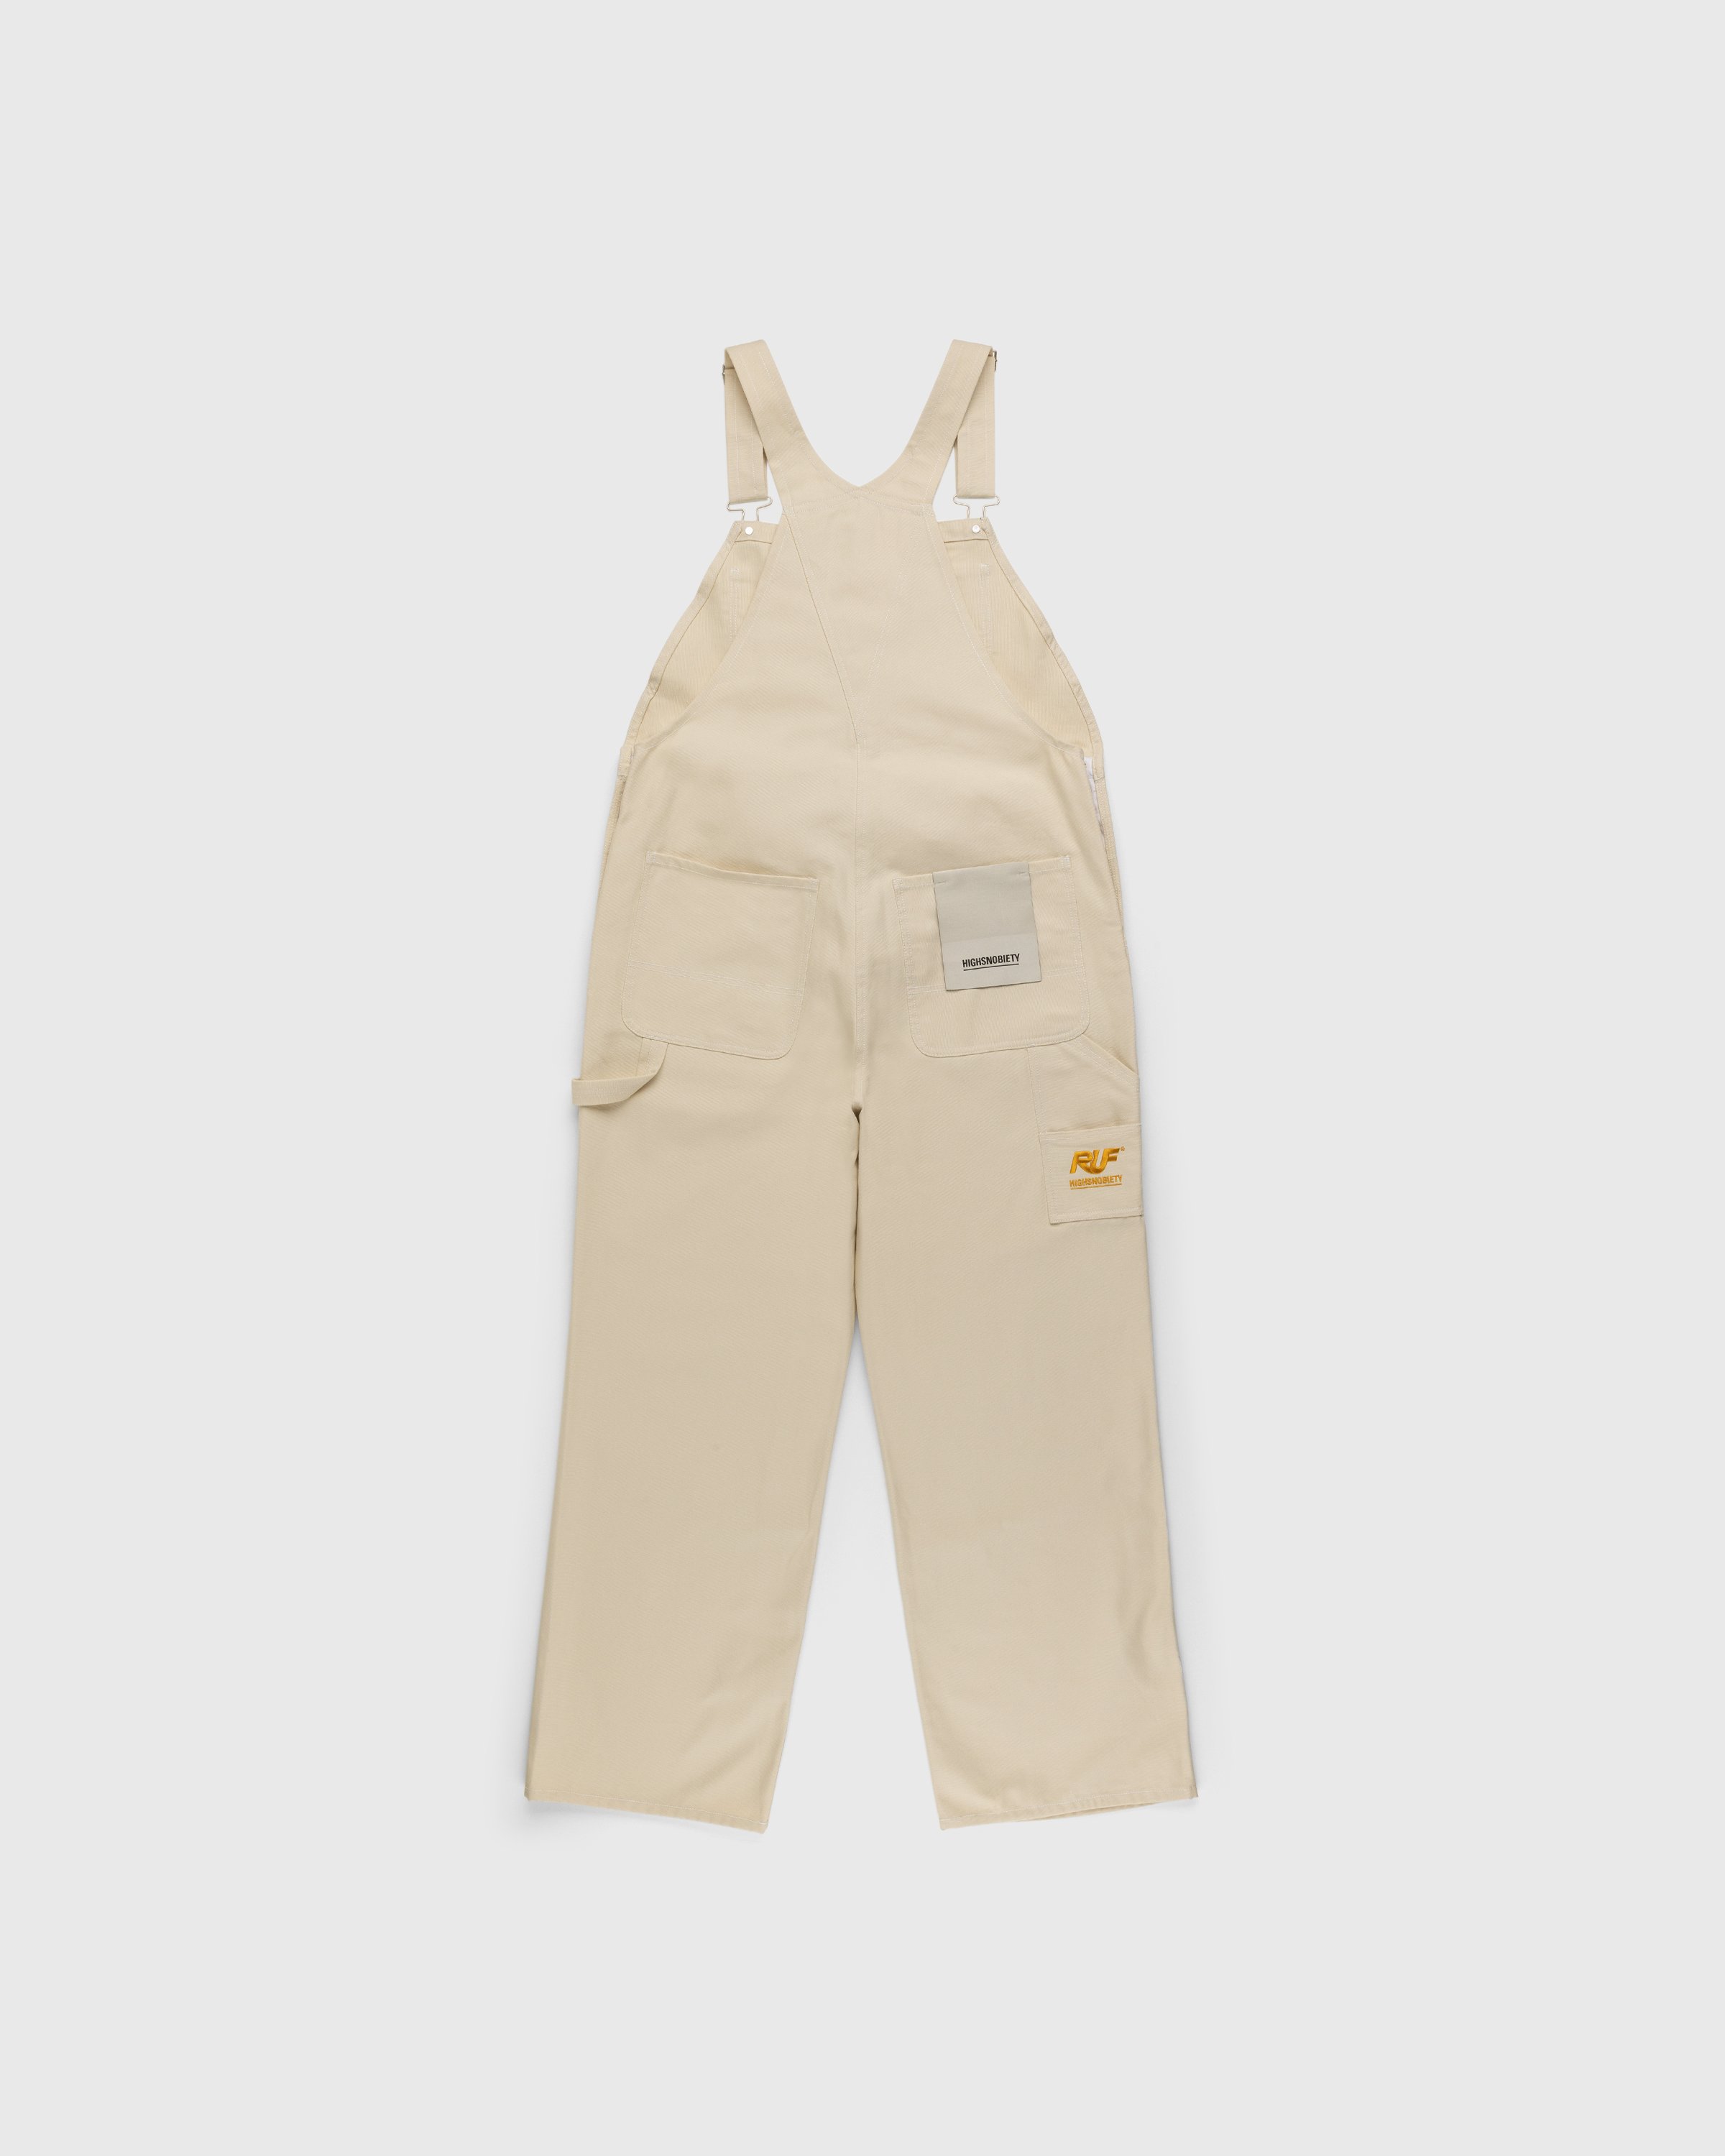 RUF x Highsnobiety - Cotton Overalls Natural - Clothing - Beige - Image 1